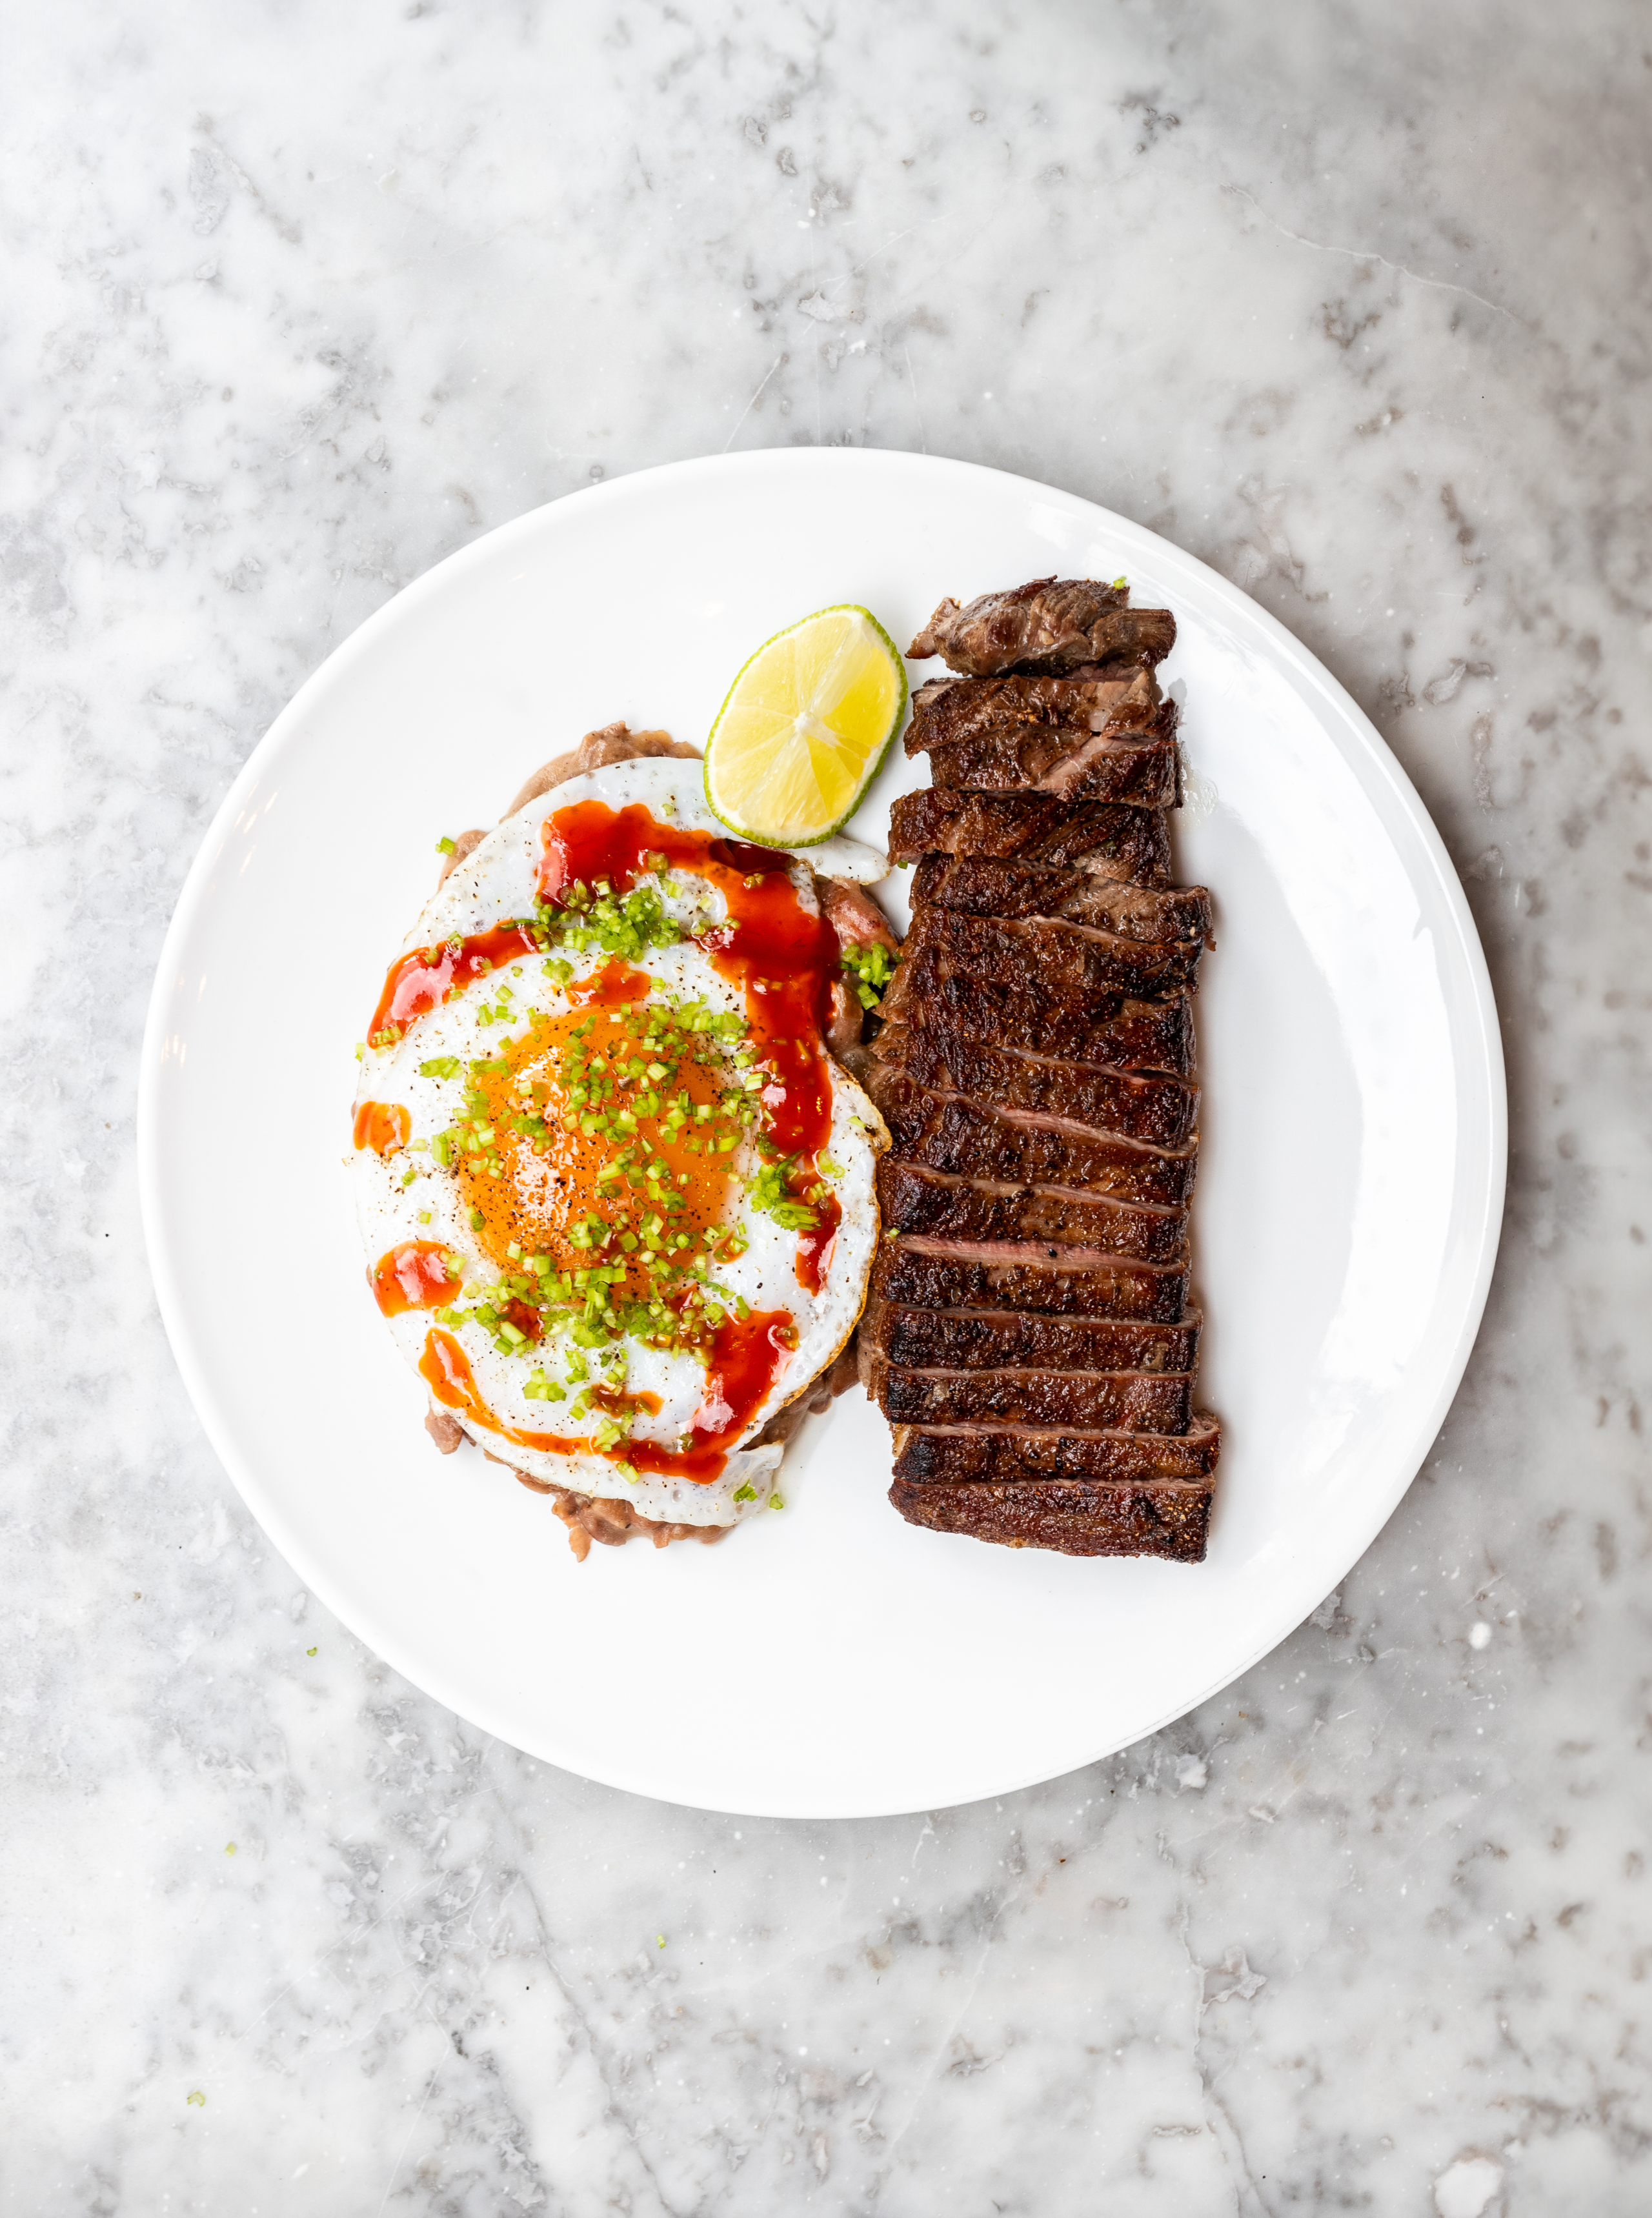 Overhead shot of refried beans with fried egg and bavette steak